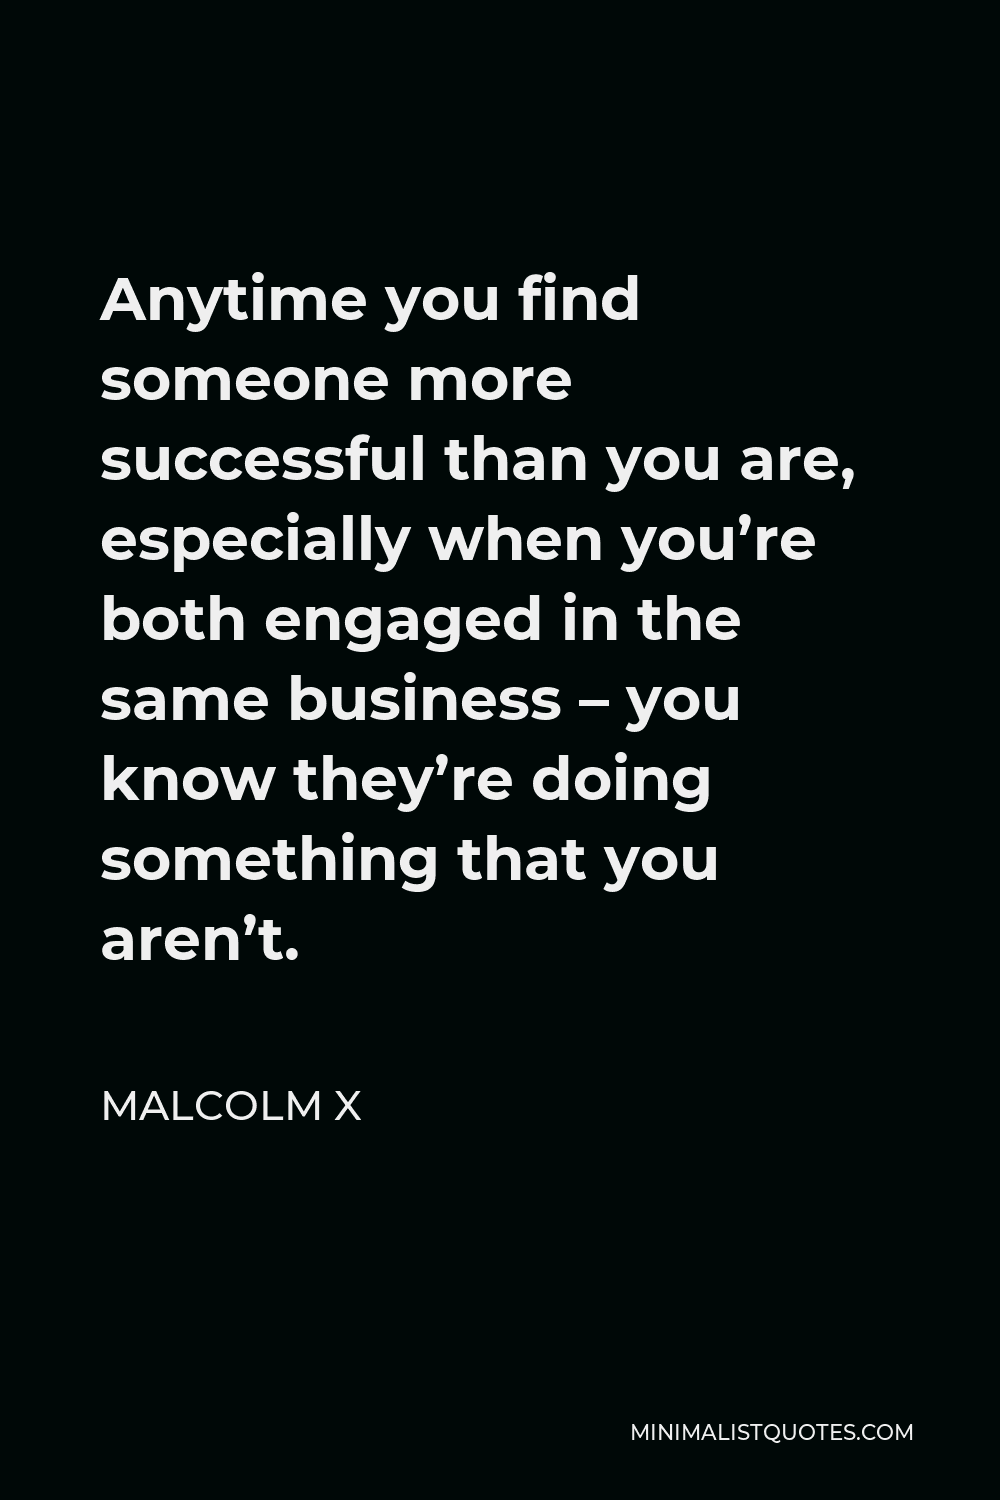 Malcolm X Quote - Anytime you find someone more successful than you are, especially when you’re both engaged in the same business – you know they’re doing something that you aren’t.